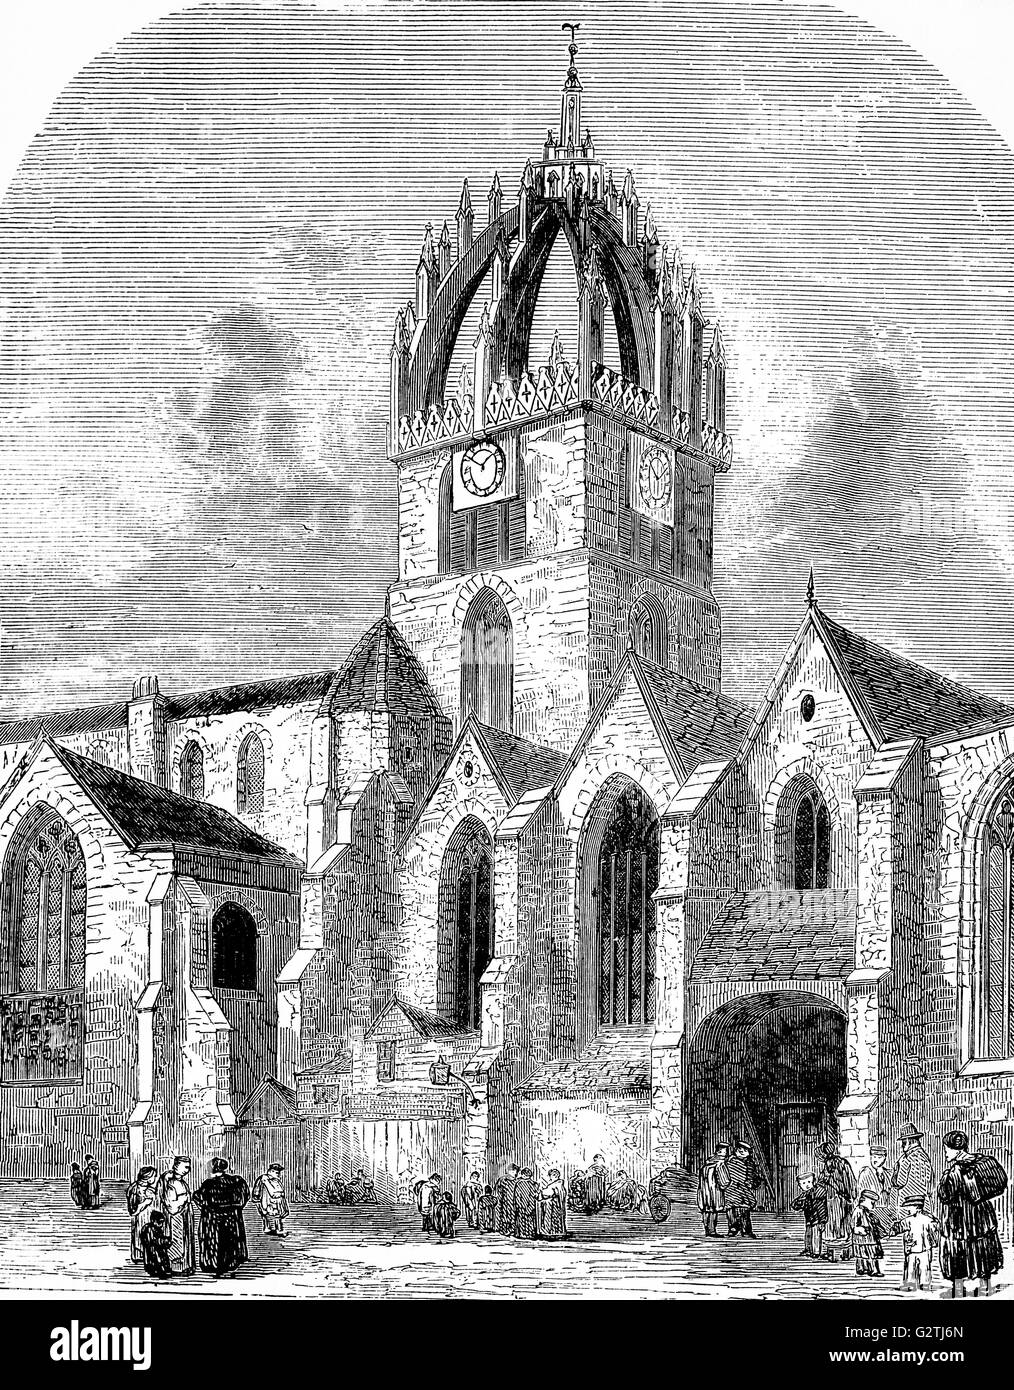 19th Century sketch of St Giles' Cathedral, also known as the High Kirk of Edinburgh, is the principal place of worship of the Church of Scotland in Edinburgh, it's  been one of Edinburgh's religious focal points for approximately 900 years. Stock Photo